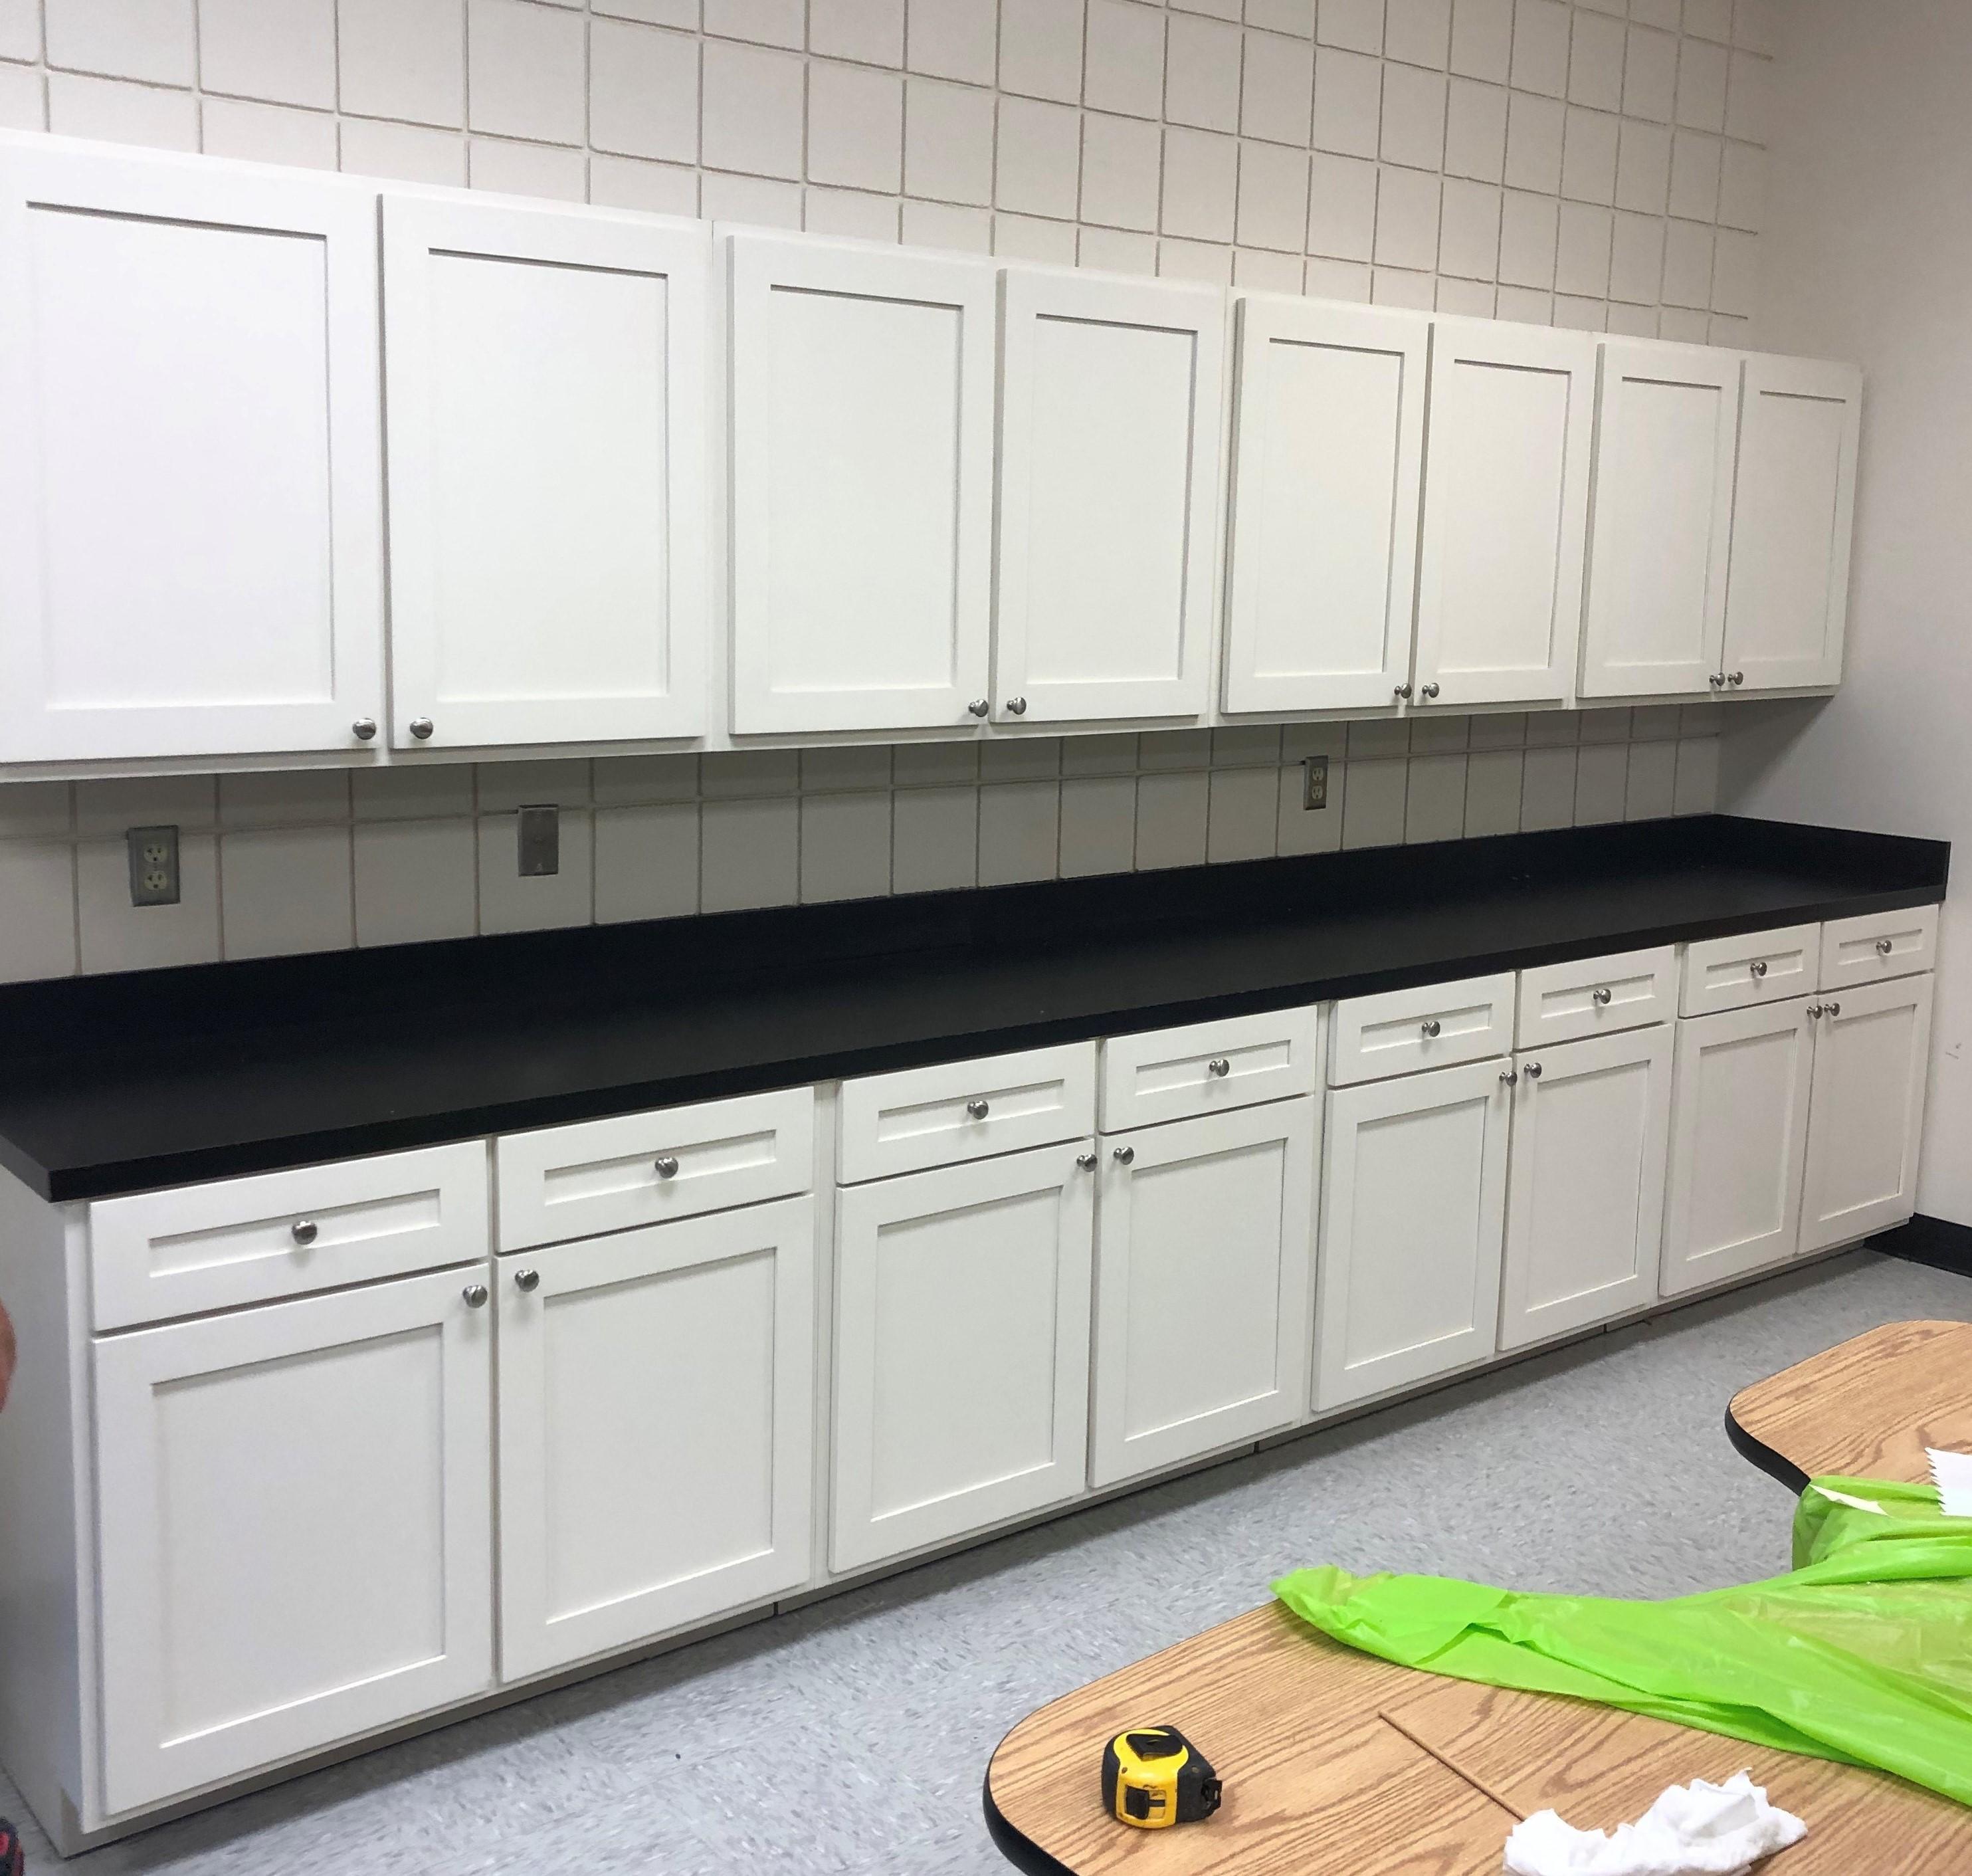 The finished cabinets installed in Tucker Elementary School.